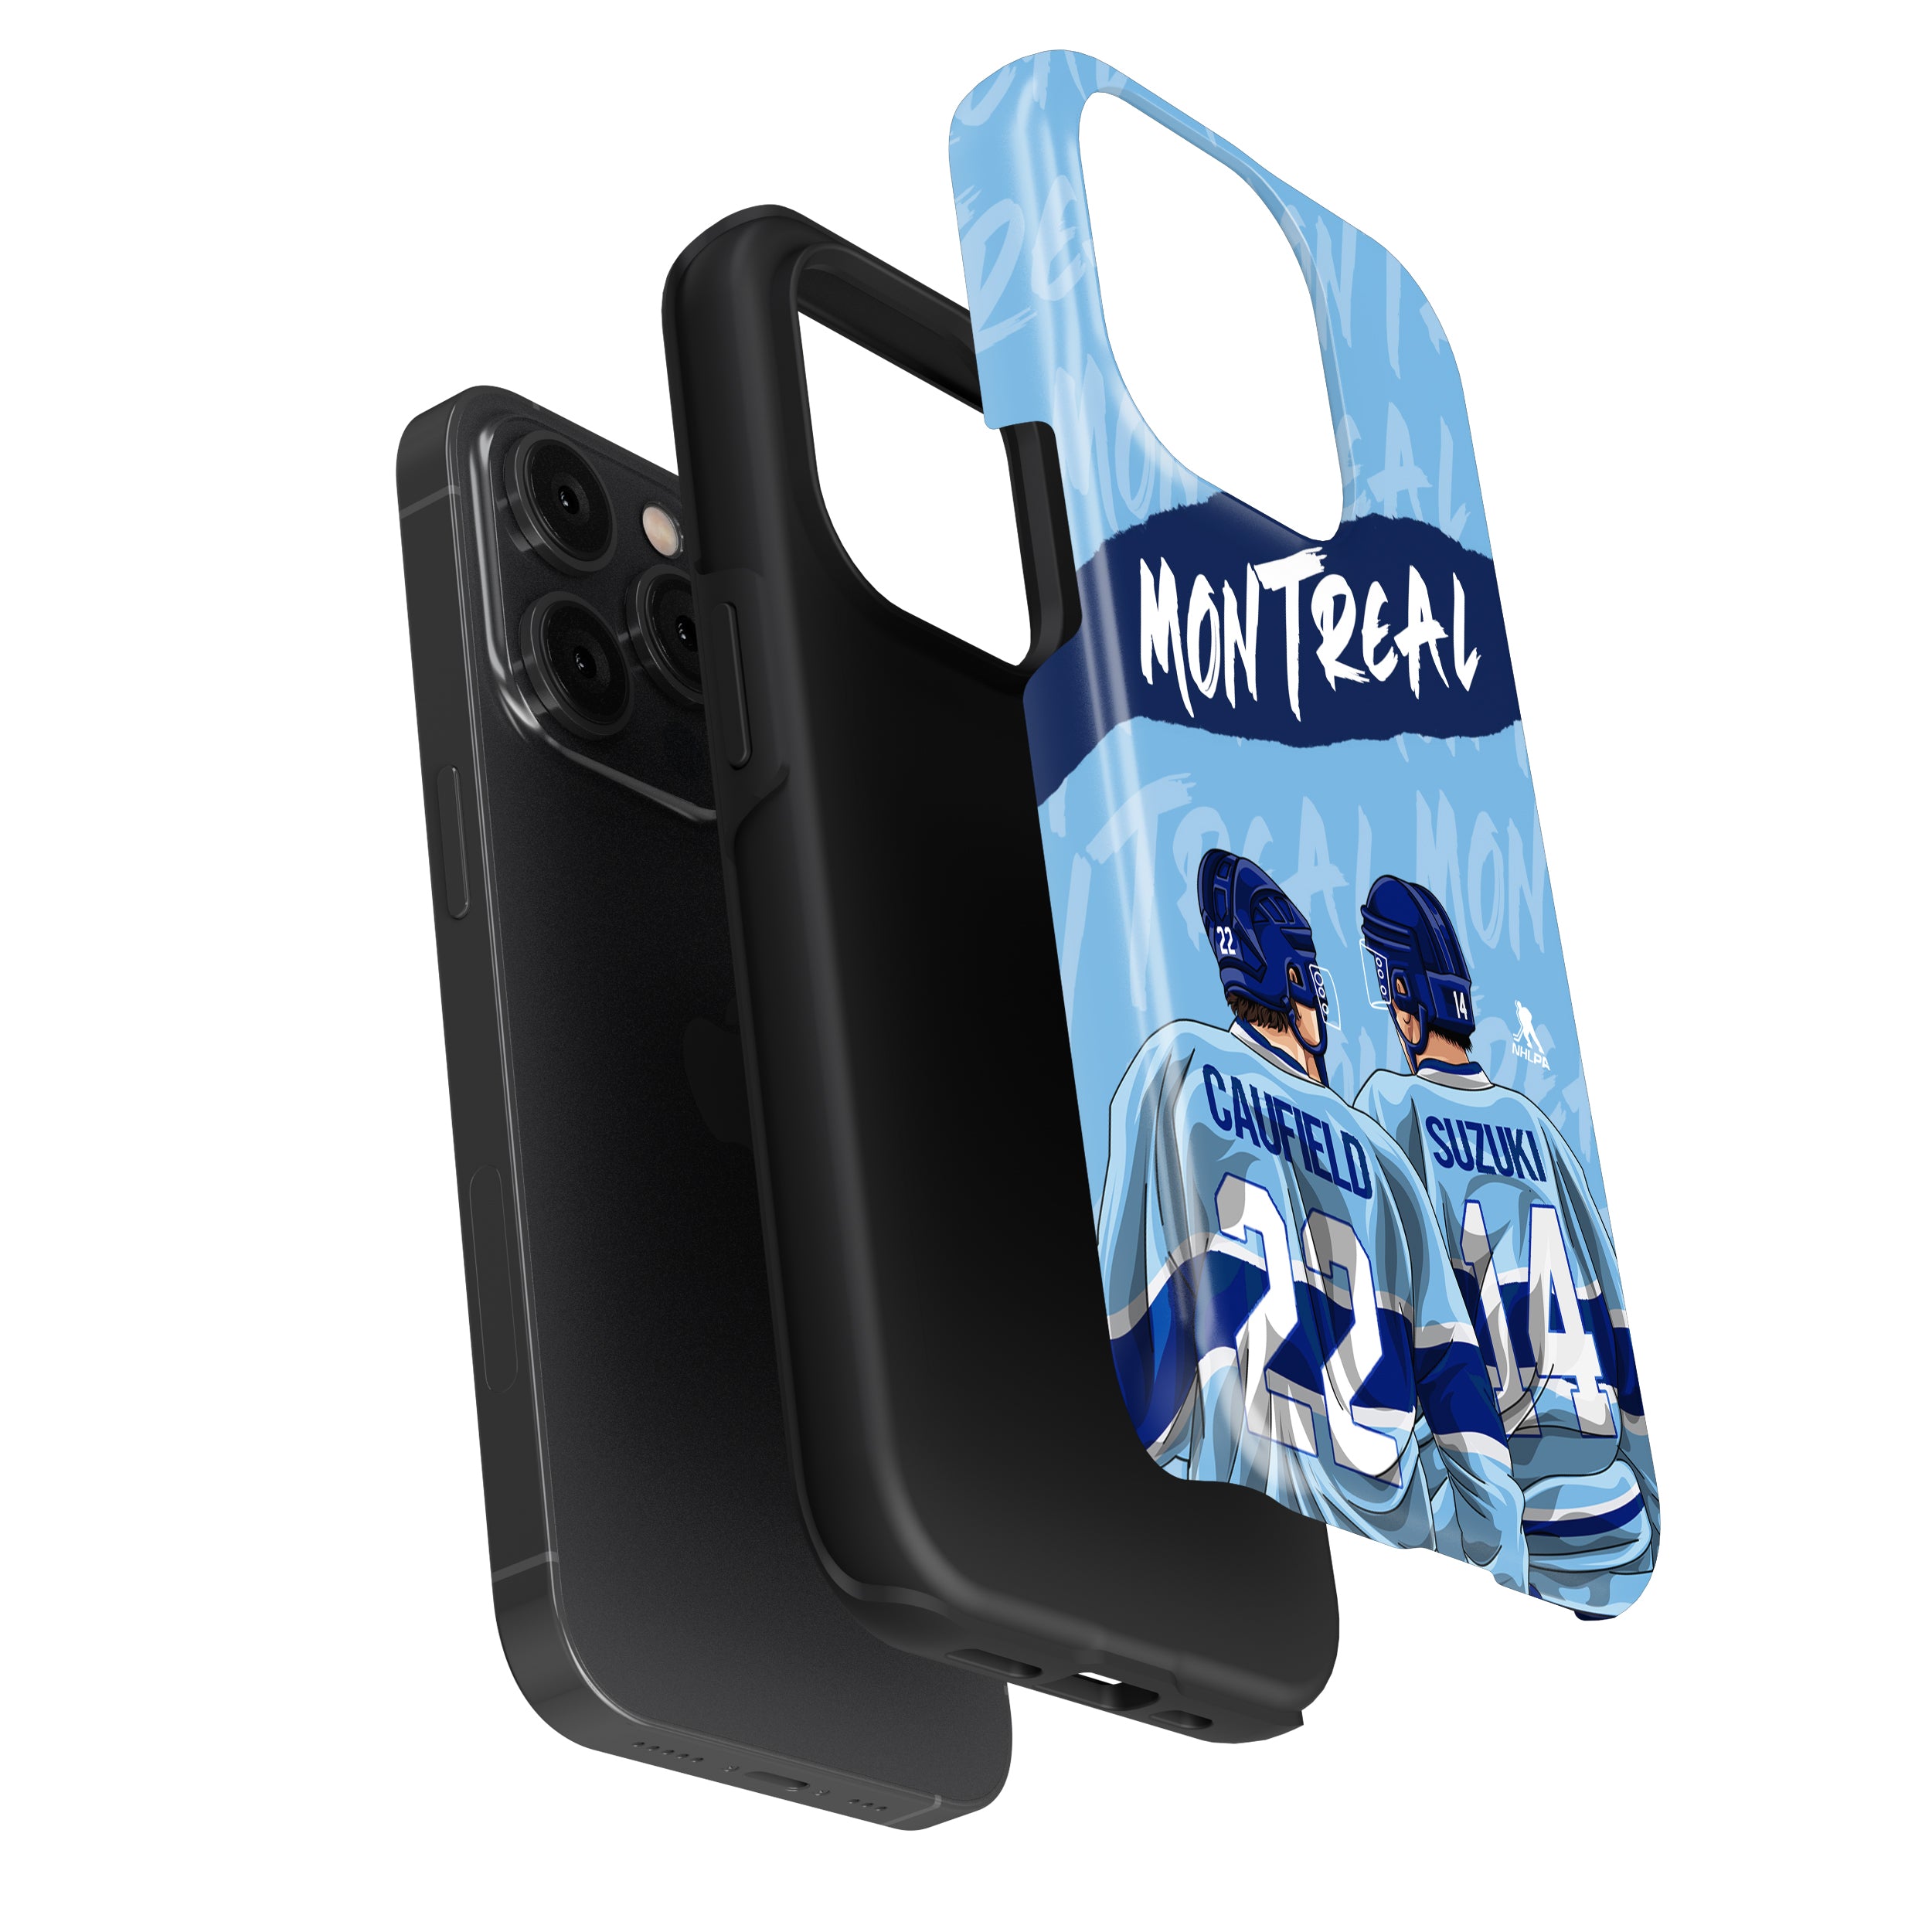 Montreal (RR) Duo Star Series 3.0 Phone Case